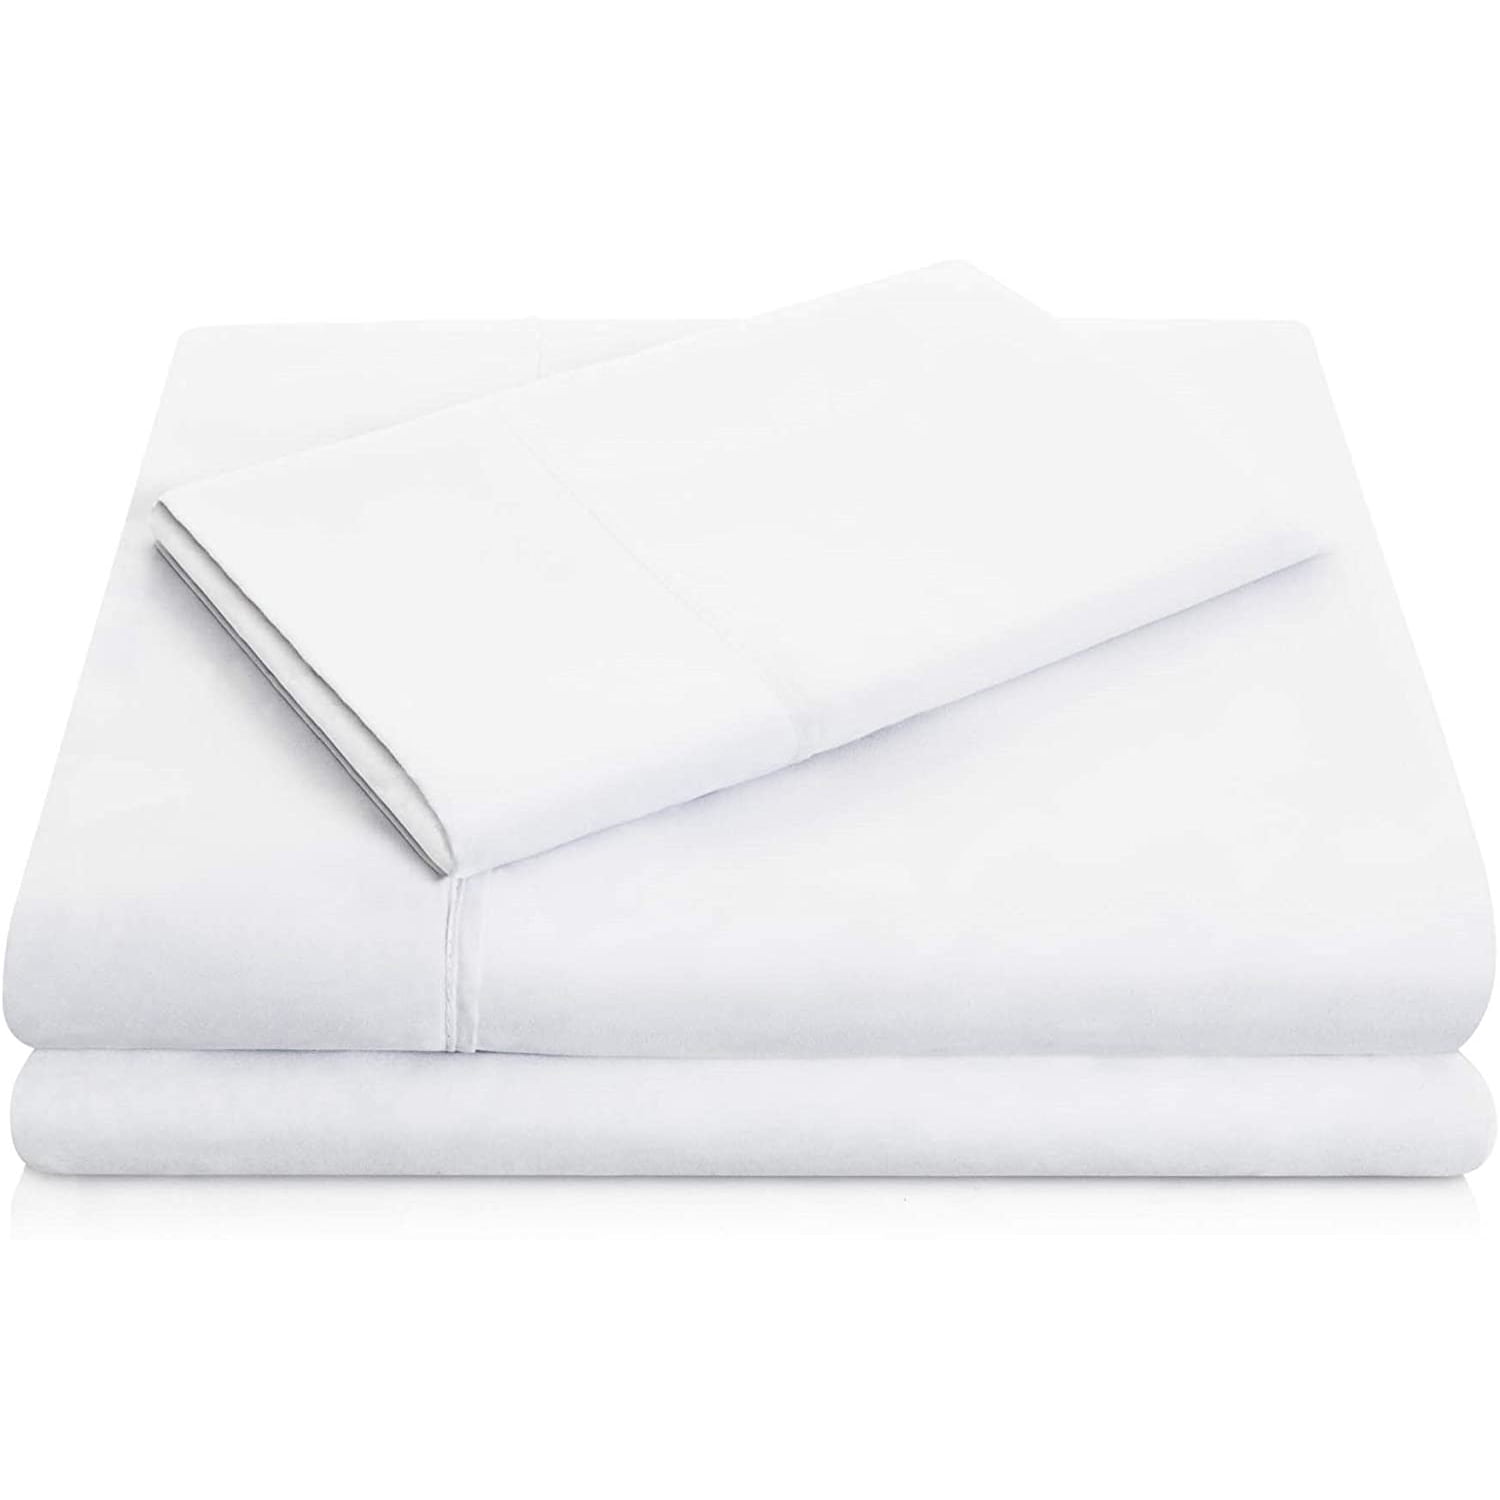 Fitted Sheets-MHF Brand-Bright White-Ultra Soft Brushed Microfiber 